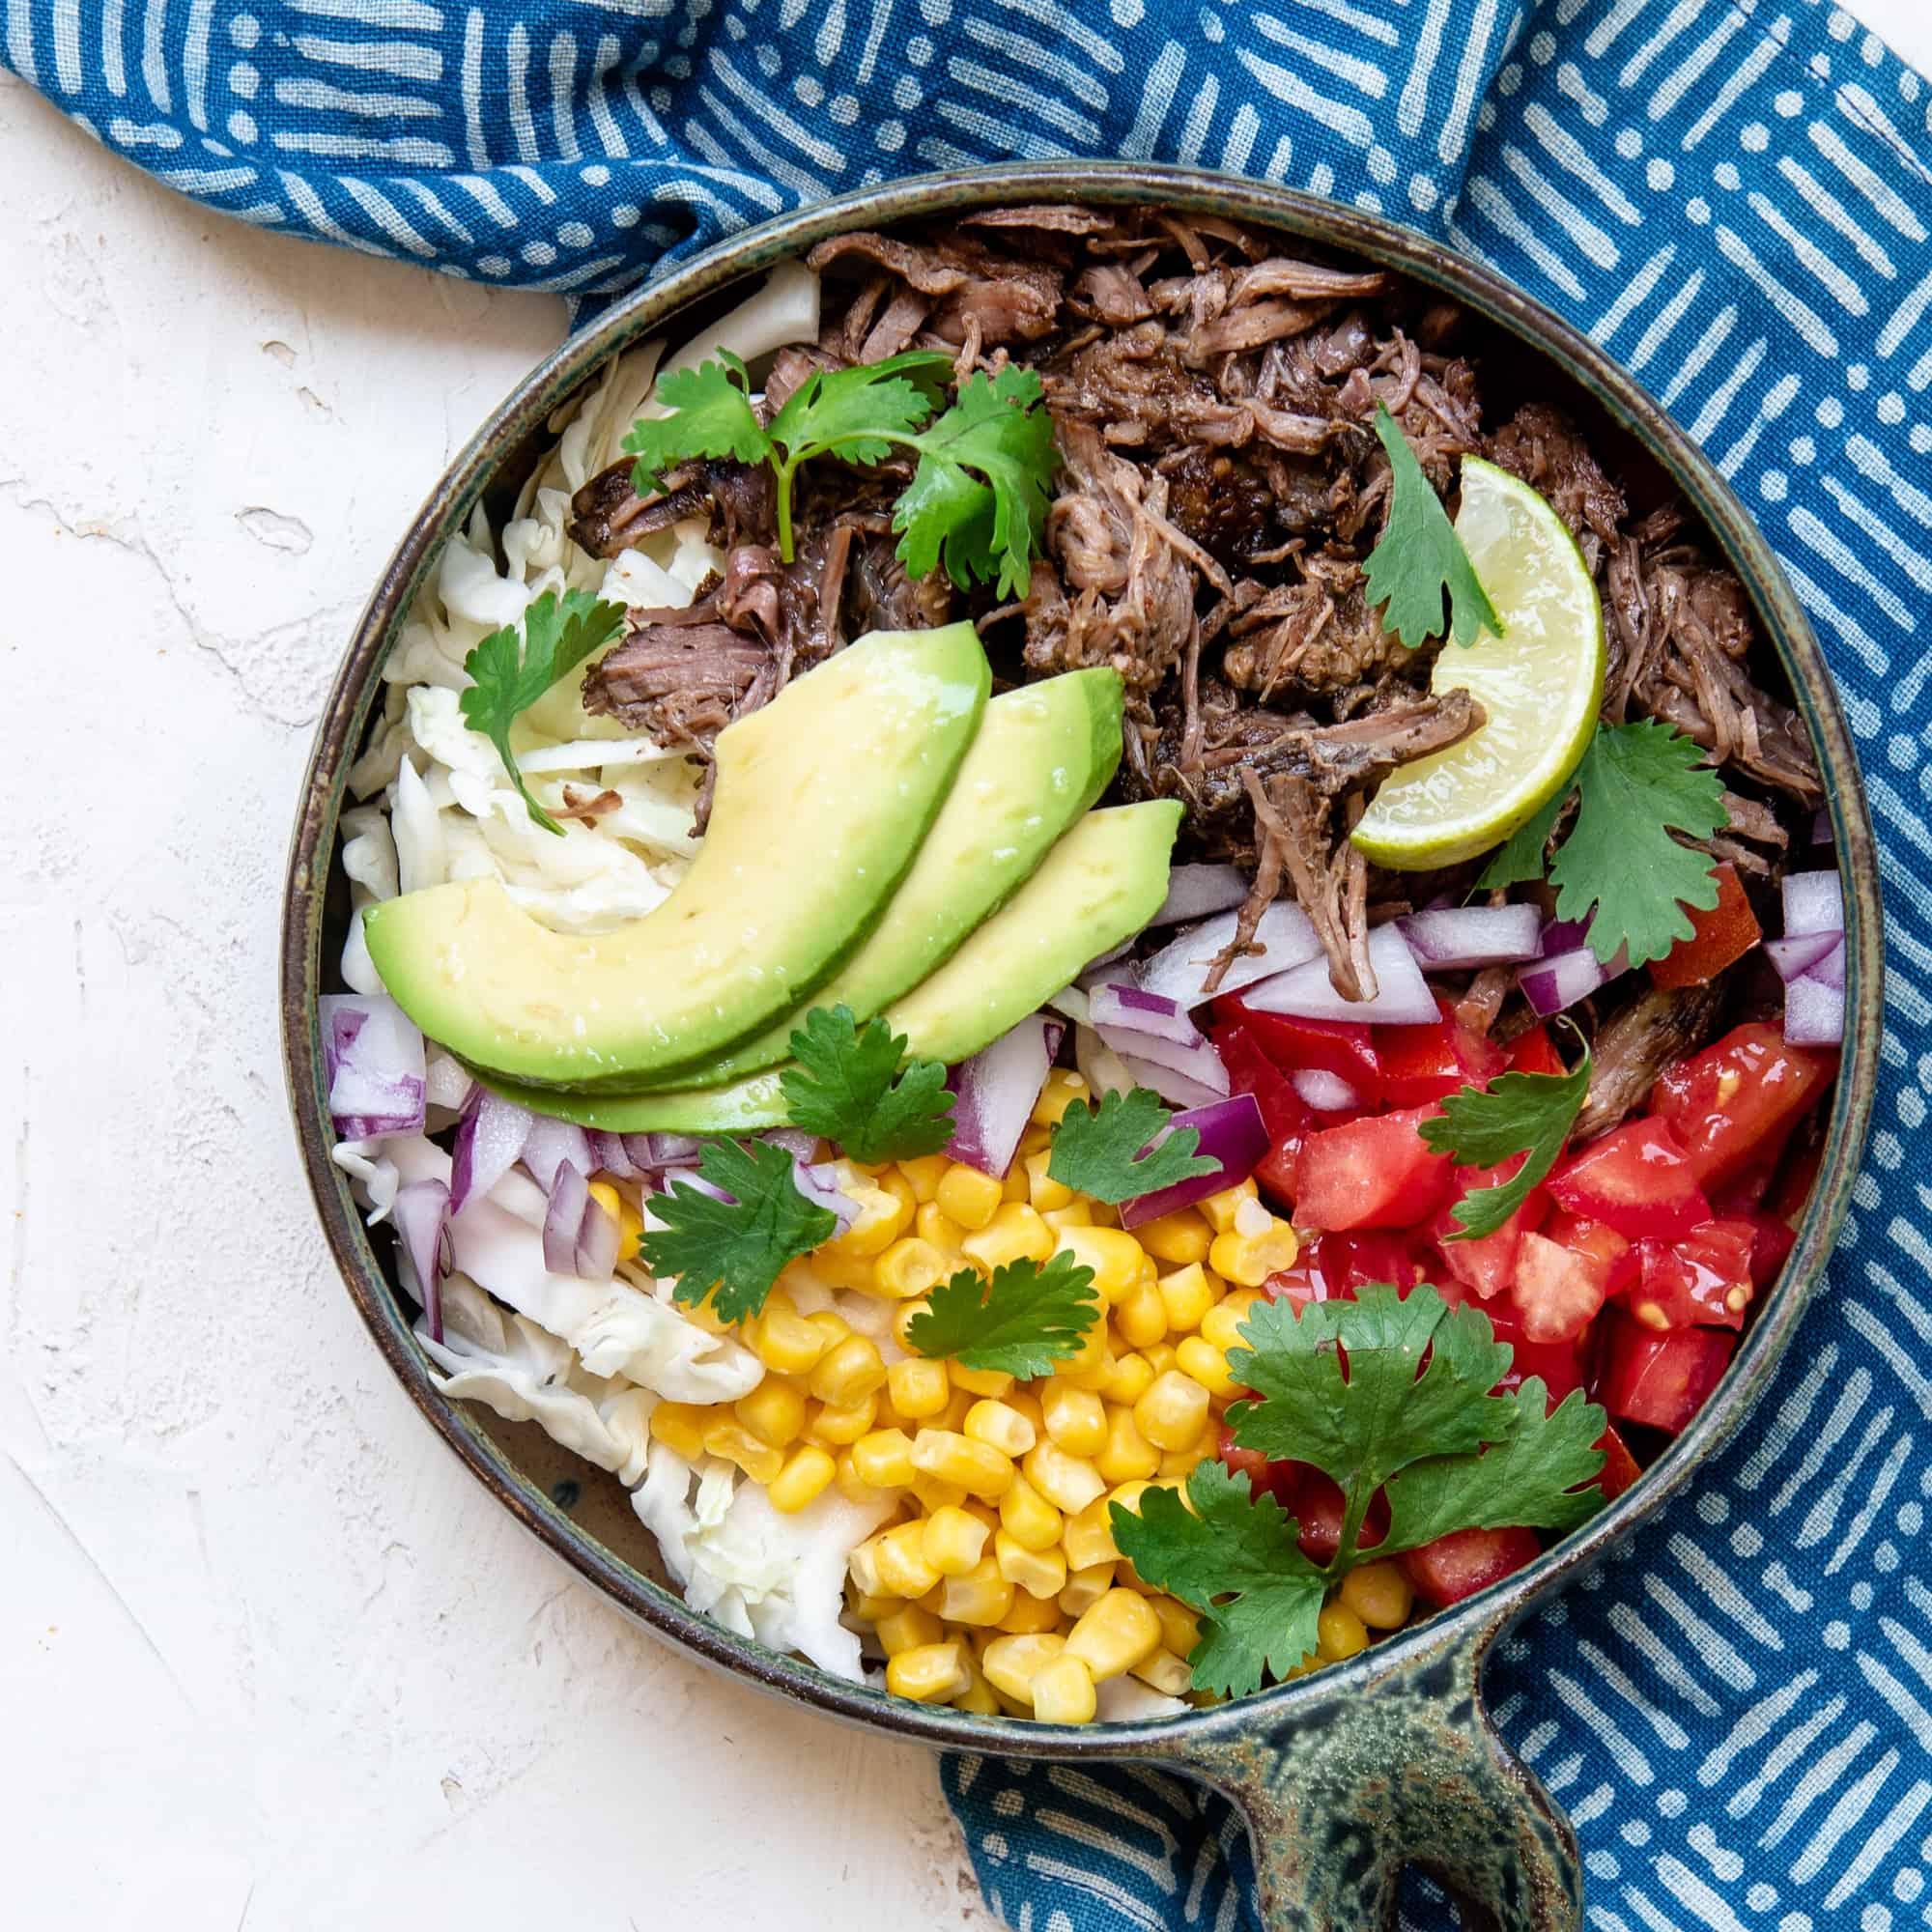 Burrito bowl with spicy beef barbacoa, avocado, tomatoes, lime, cilantro, cabbage and corn next to a blue pattern napkin